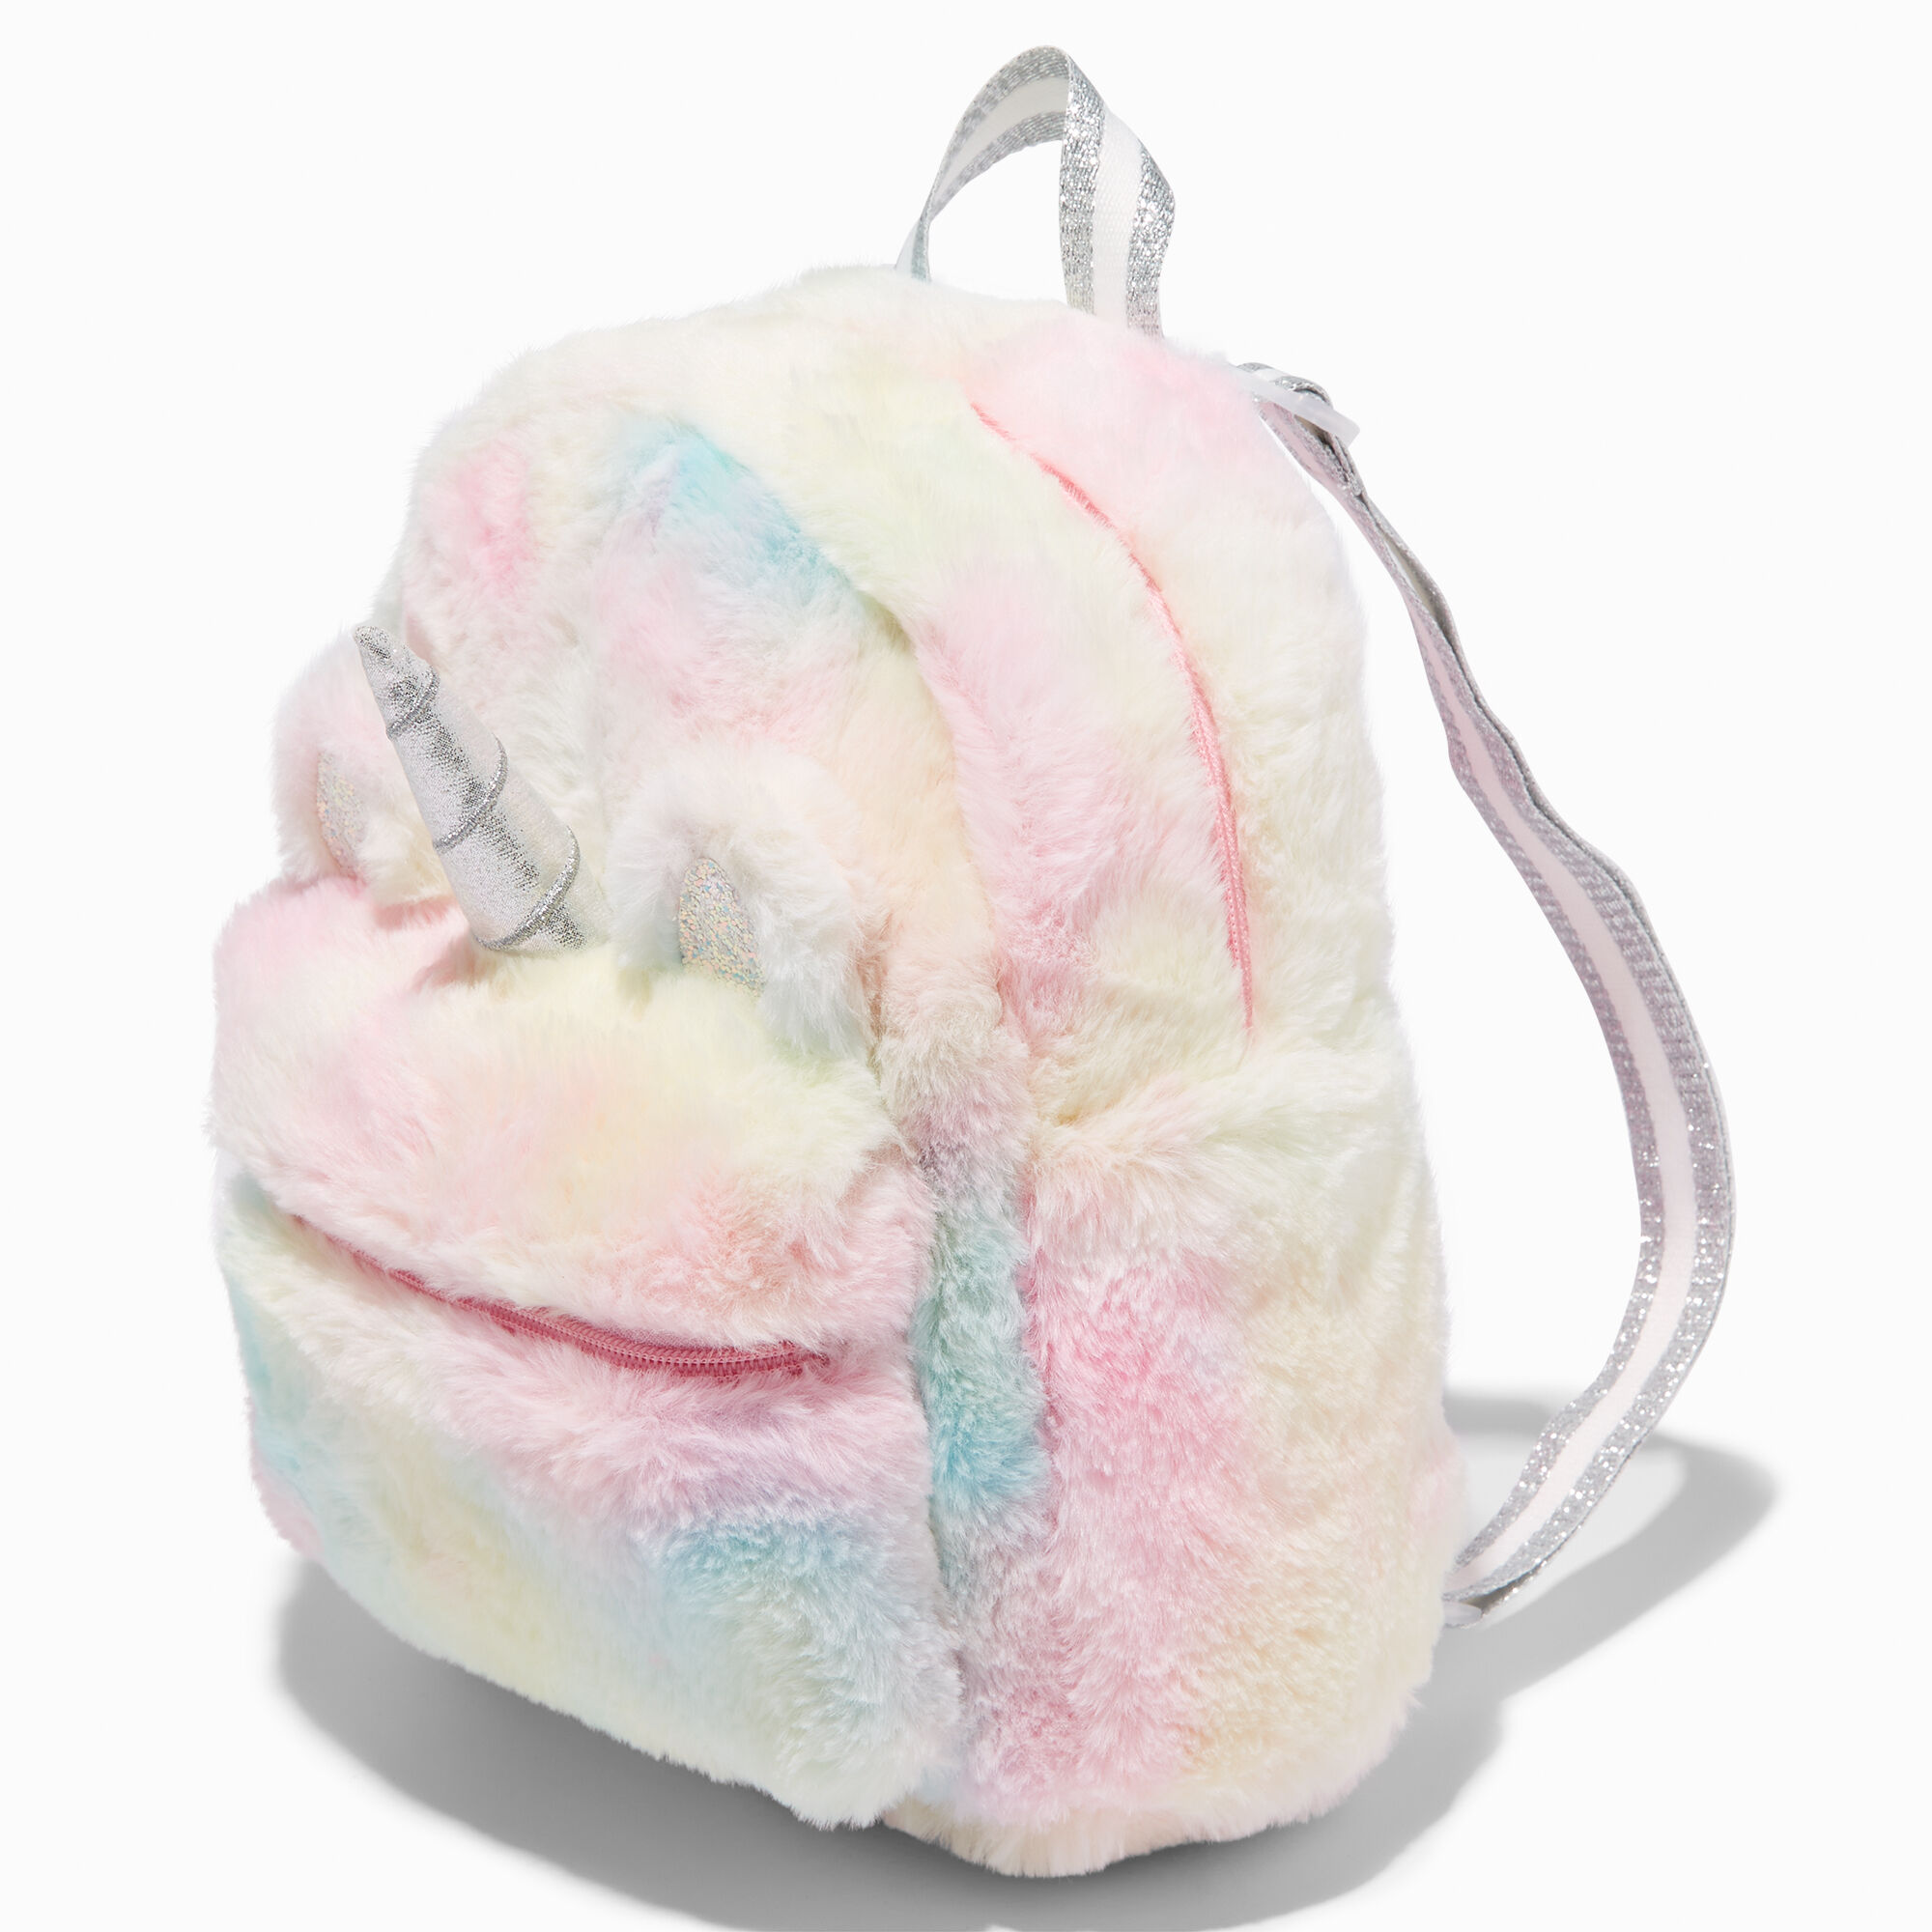 View Claires Pastel Tie Dye Unicorn Furry Mini Backpack information